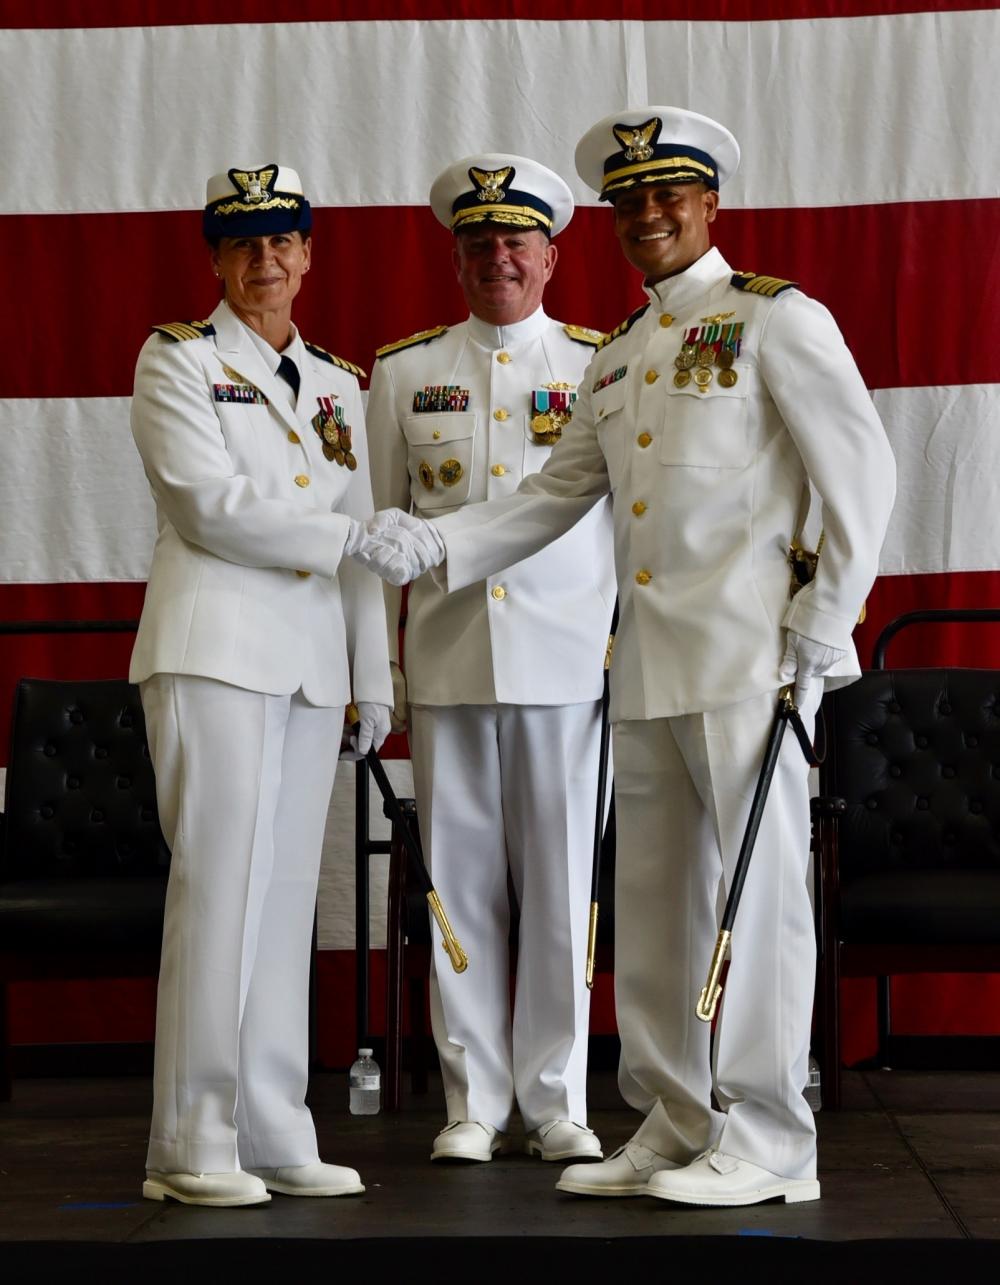 Capt. Lawrence Gaillard (right) shakes hands with Capt. Tina Peña (left), and Rear Adm. Brendan C. McPherson (center), during Air Station Borinquen's Change of Command in Aguadilla, Puerto Rico June 17, 2022. During the ceremony, Capt. Gaillard relieved Capt. Peña as the new commanding officer of Air Station Borinquen. (U.S. Coast Guard photo by Ricardo Castrodad)